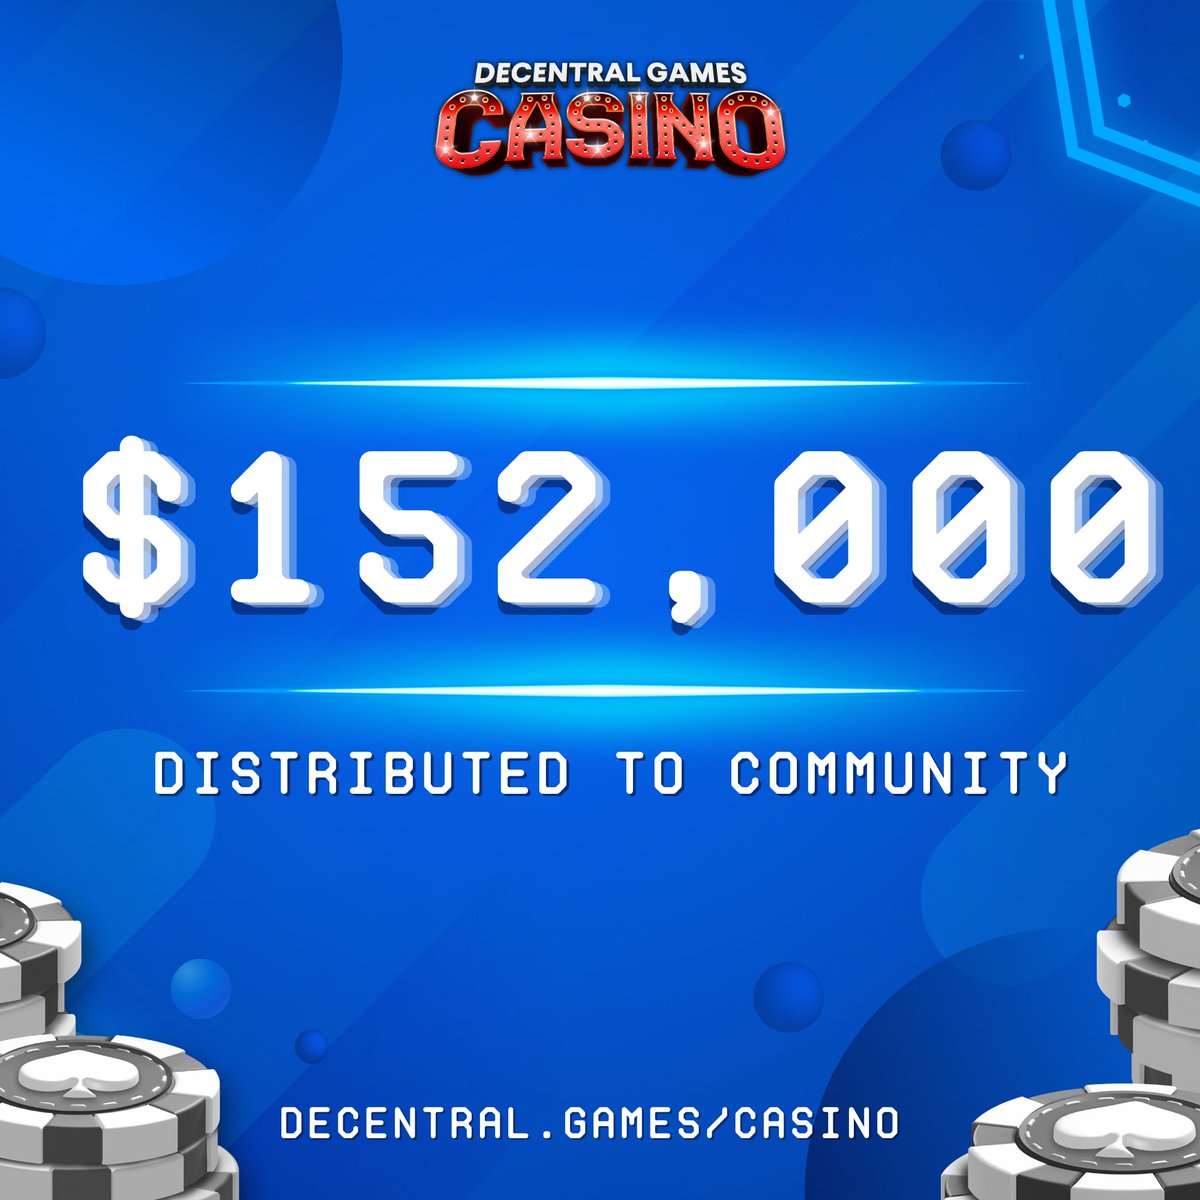 Over the past month, we've distributed 80,000+ Blast Gold and $152,000+ in rewards back to our community via: • Cashback rewards • Referral rewards • Big prizes for casino competitions • Daily and weekly volume leaderboard prizes • Daily cash poker leaderboard prizes It